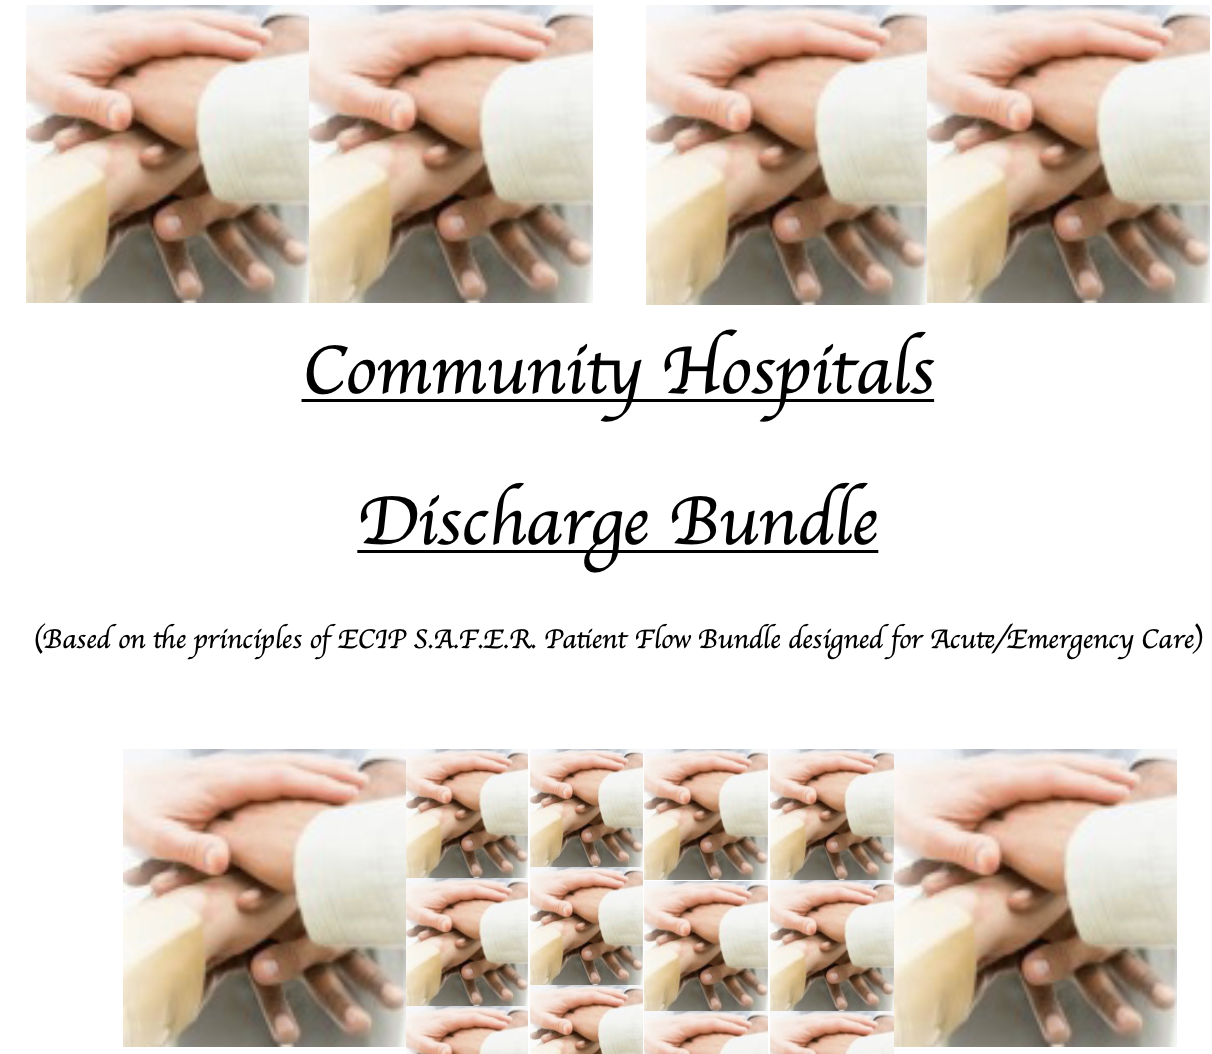 Using the ‘Discharge Bundle’ reduced DTOC’s in 12 weeks. featured image